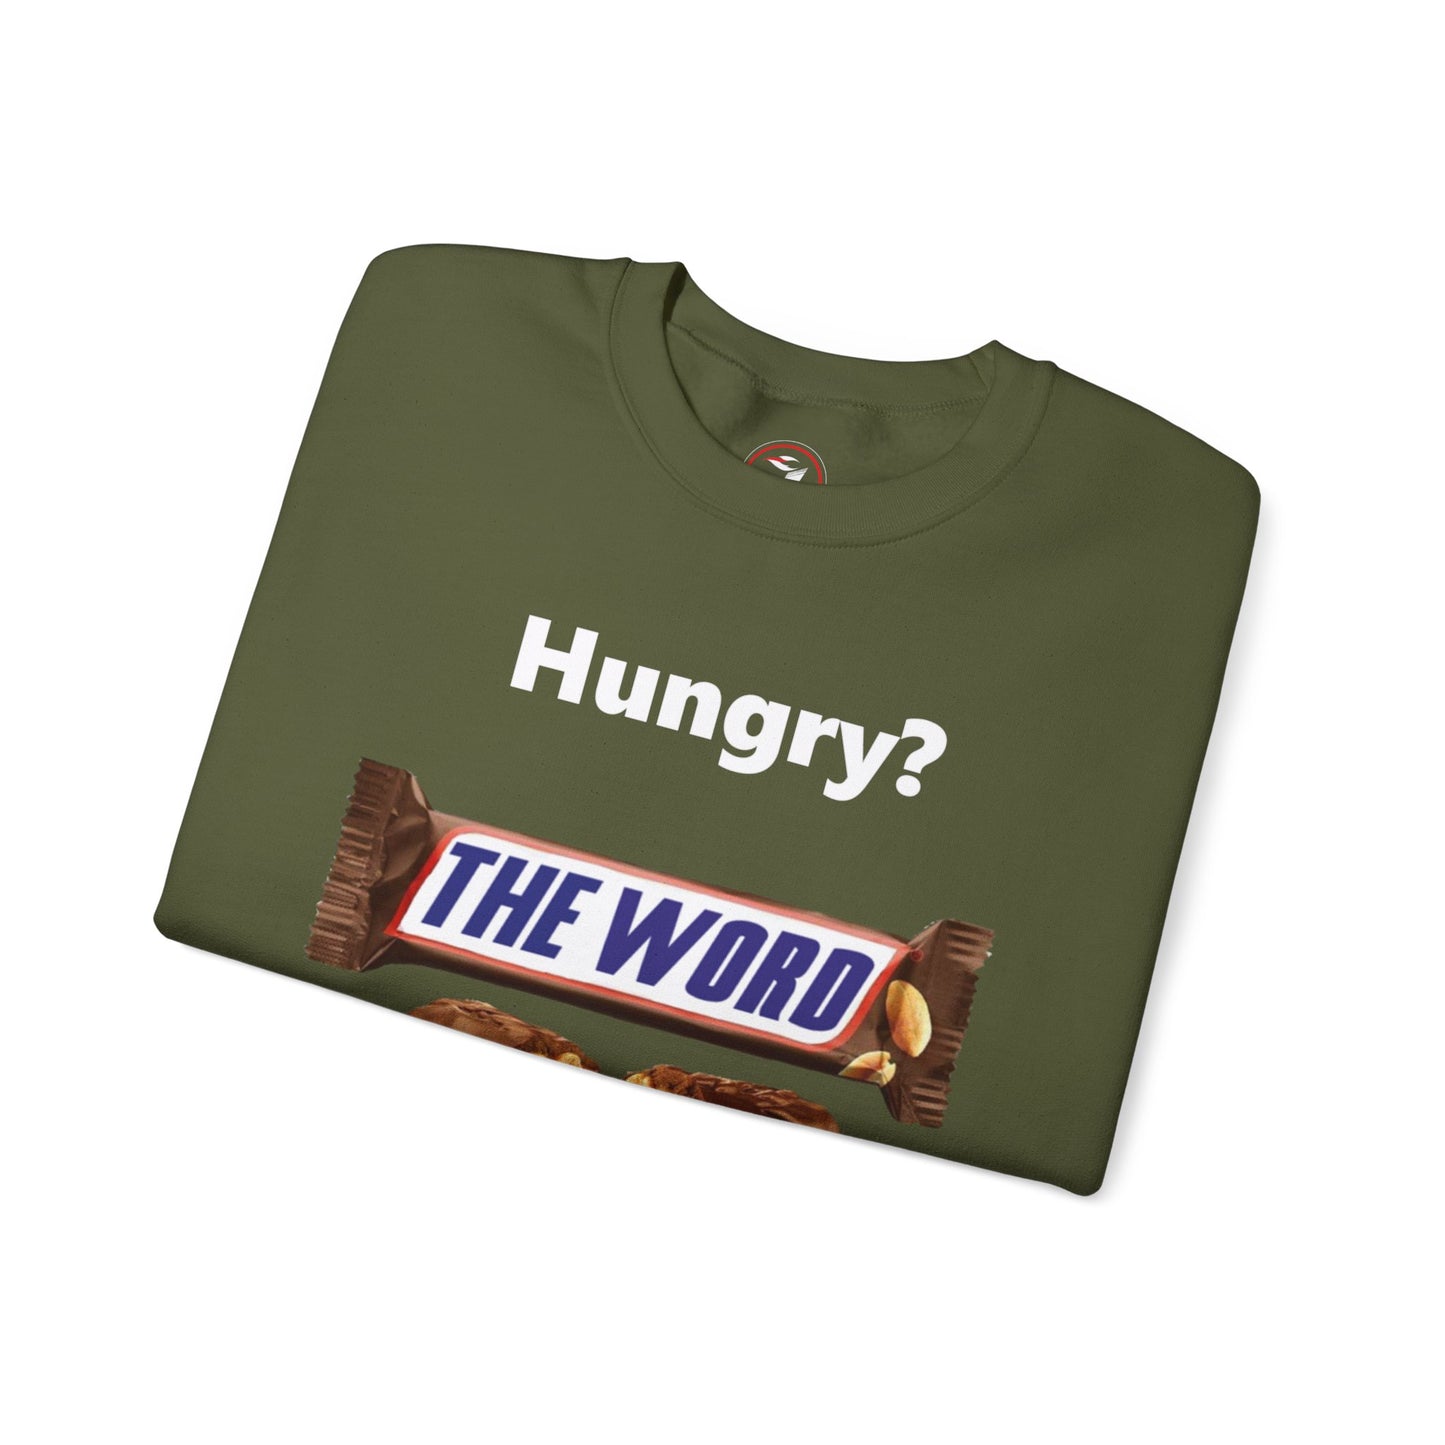 Hungry for the Word Unisex Heavy Blend™ Crewneck Sweatshirt